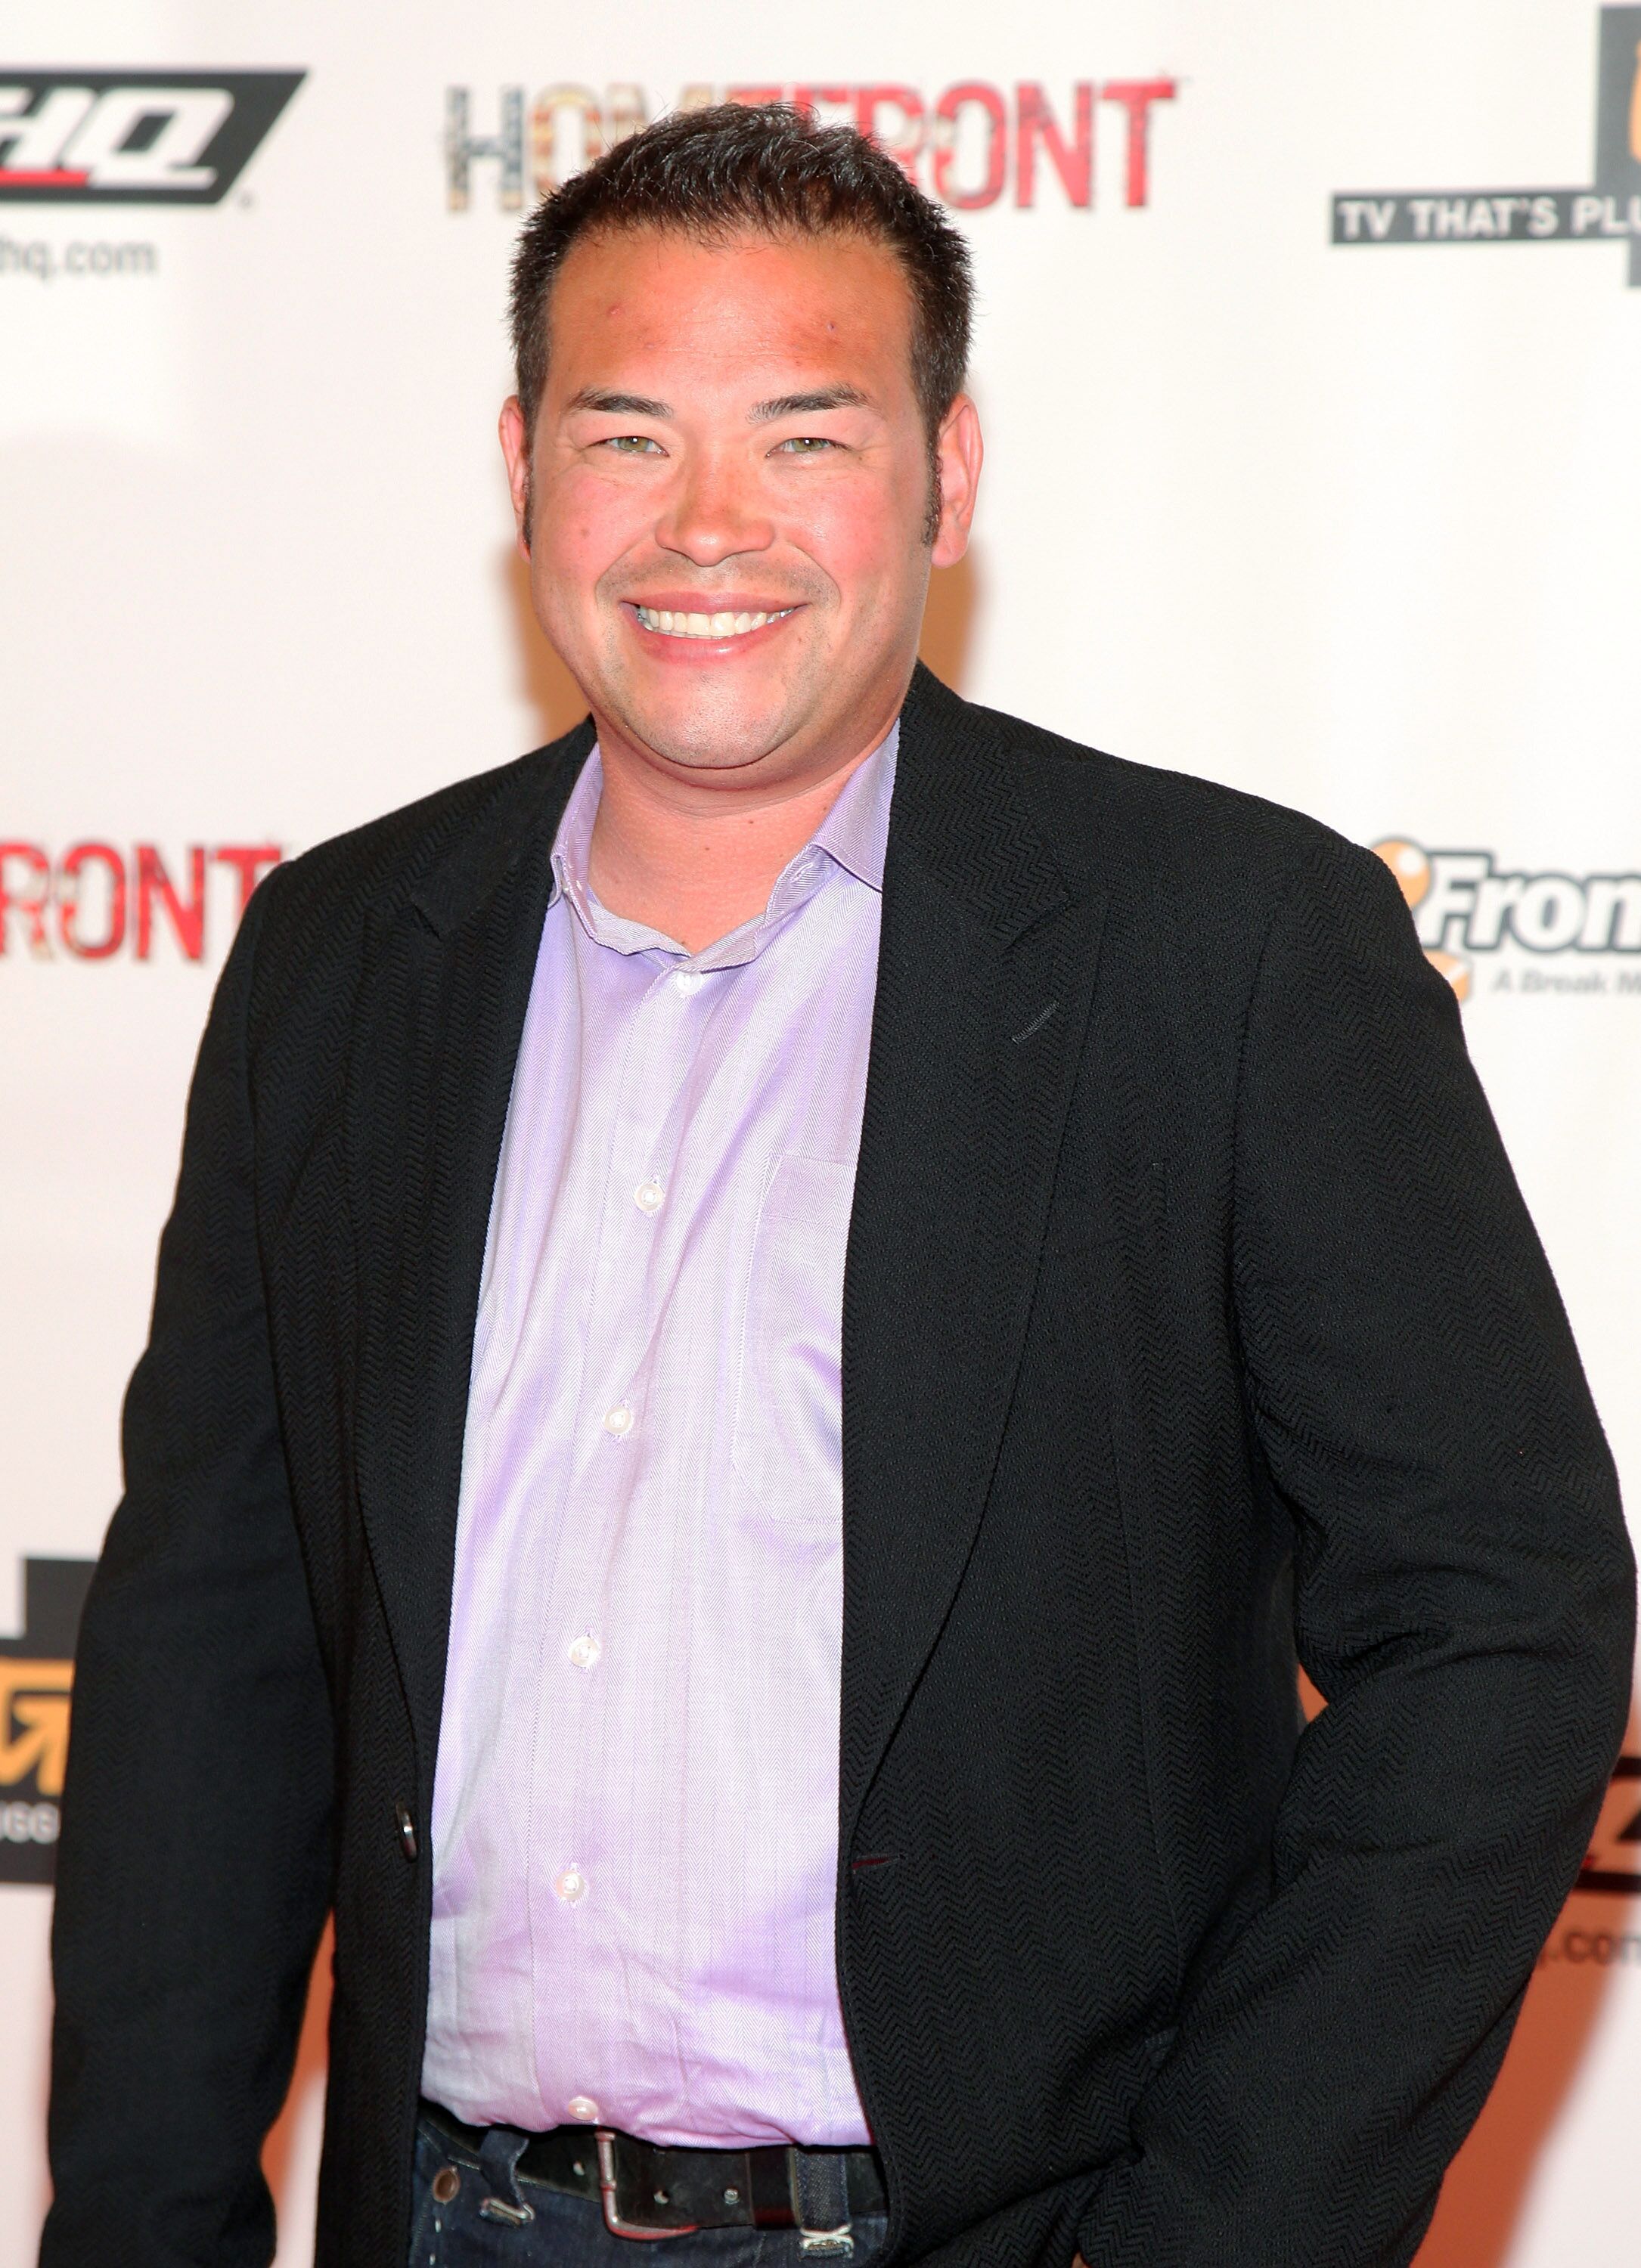 Jon Gosselin arrives at THQ's E3 'Take No Prisoners' event at The Standard Hotel Downtown on June 16, 2010 | Photo: Getty Images